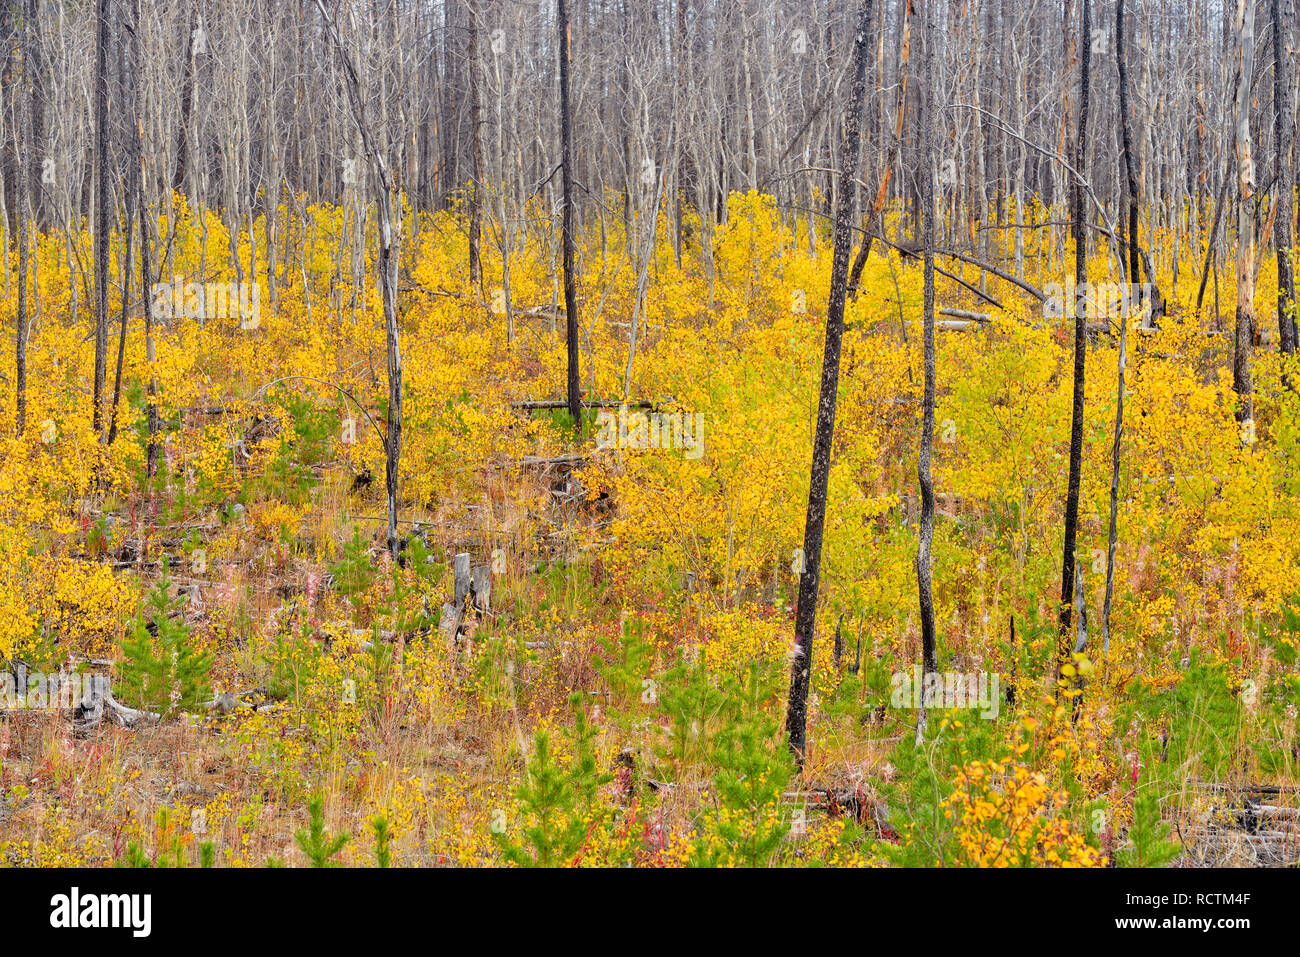 Aspen saplings in a regenerating forest fire zone, Hwy 3 North to Yellowknife, Northwest Territories, Canada Stock Photo